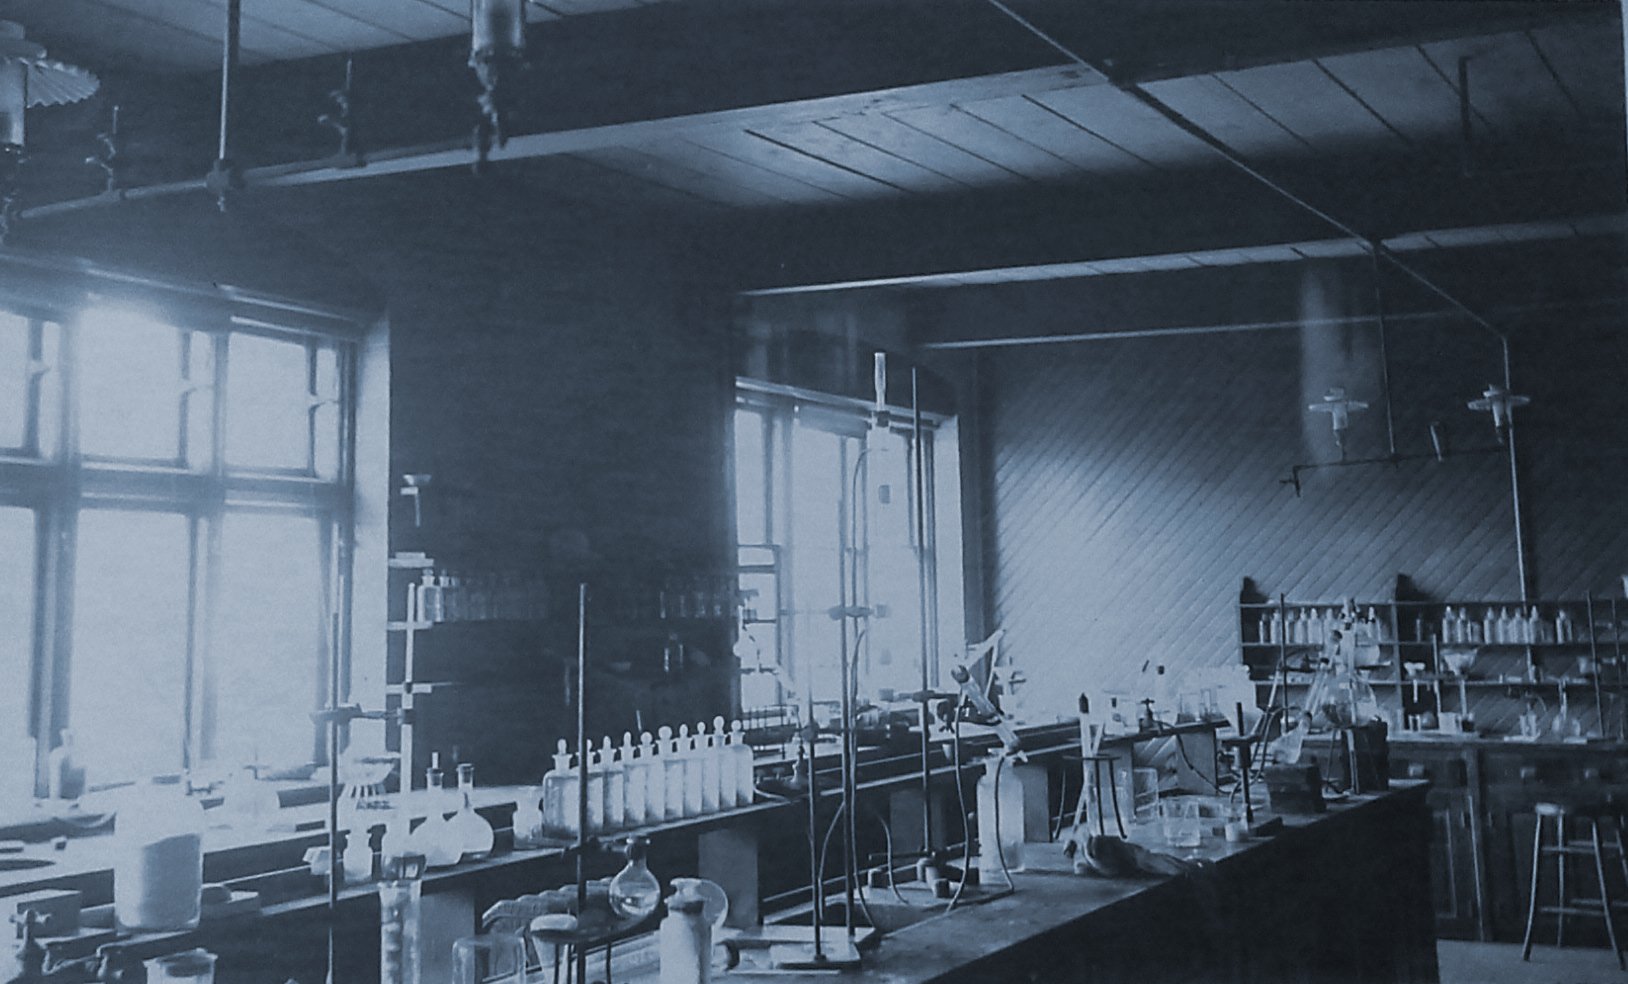 Second slide; Photograph of a chemistry Lab c. 1900 at Bryn Mawr College.